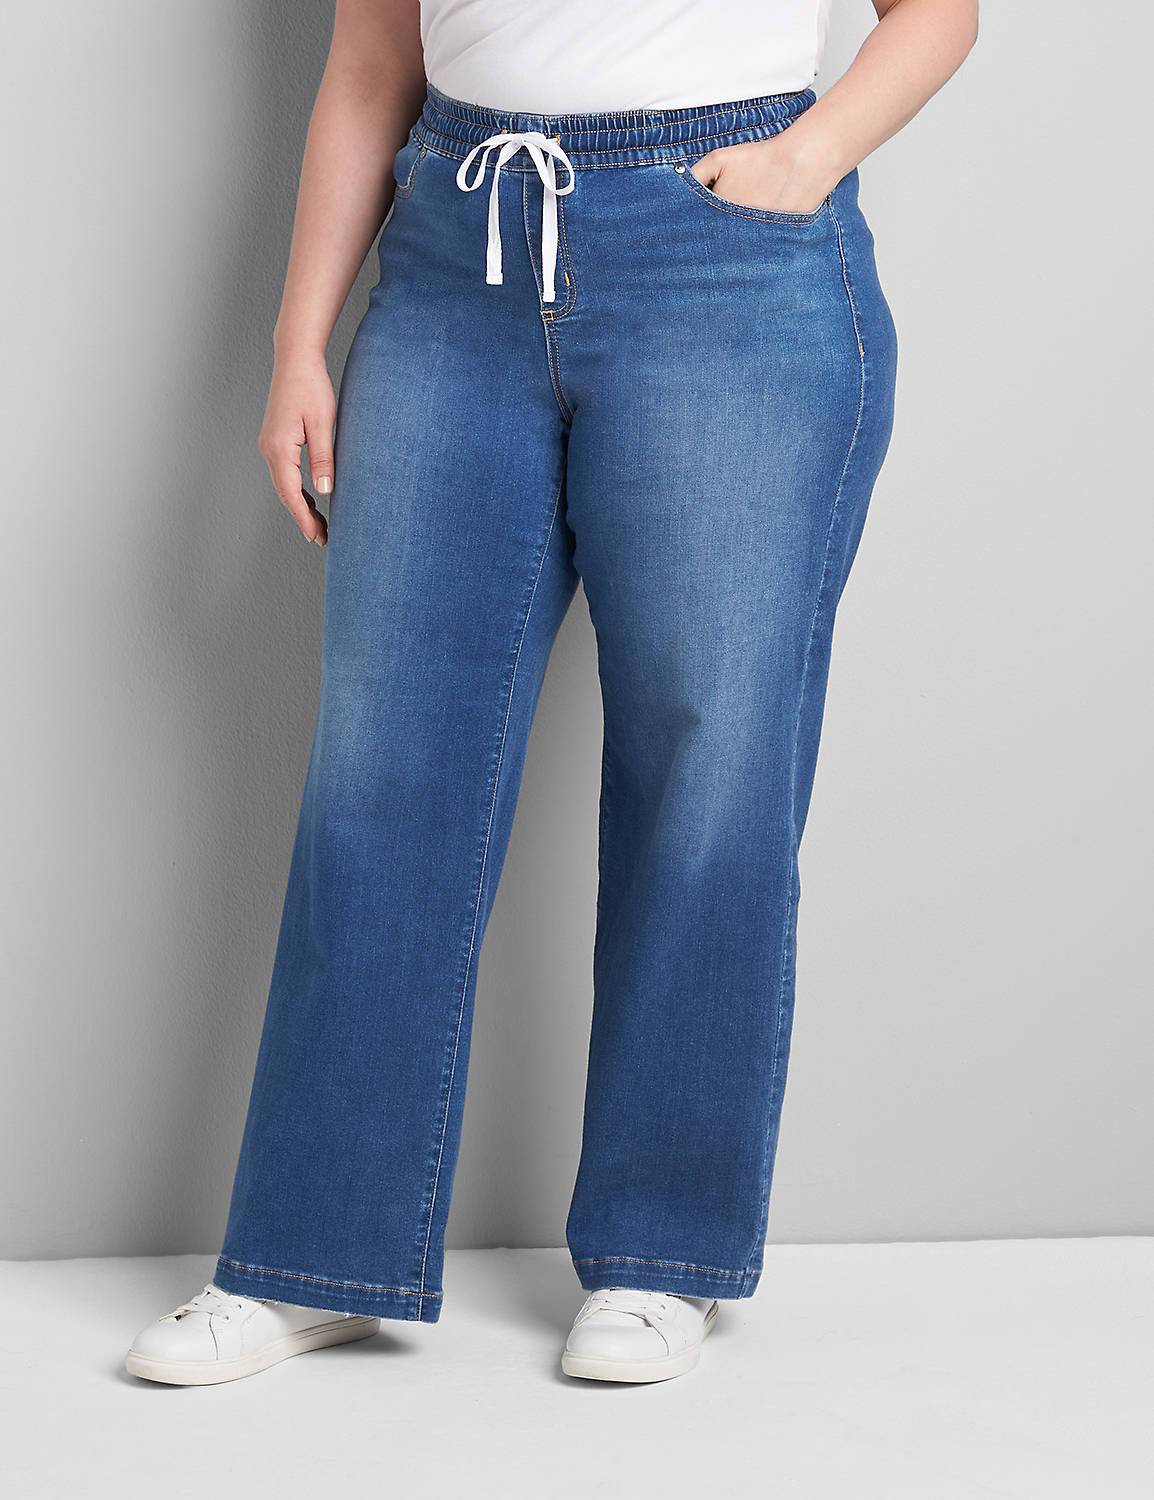 Pull-On Wide Leg Jean Product Image 1